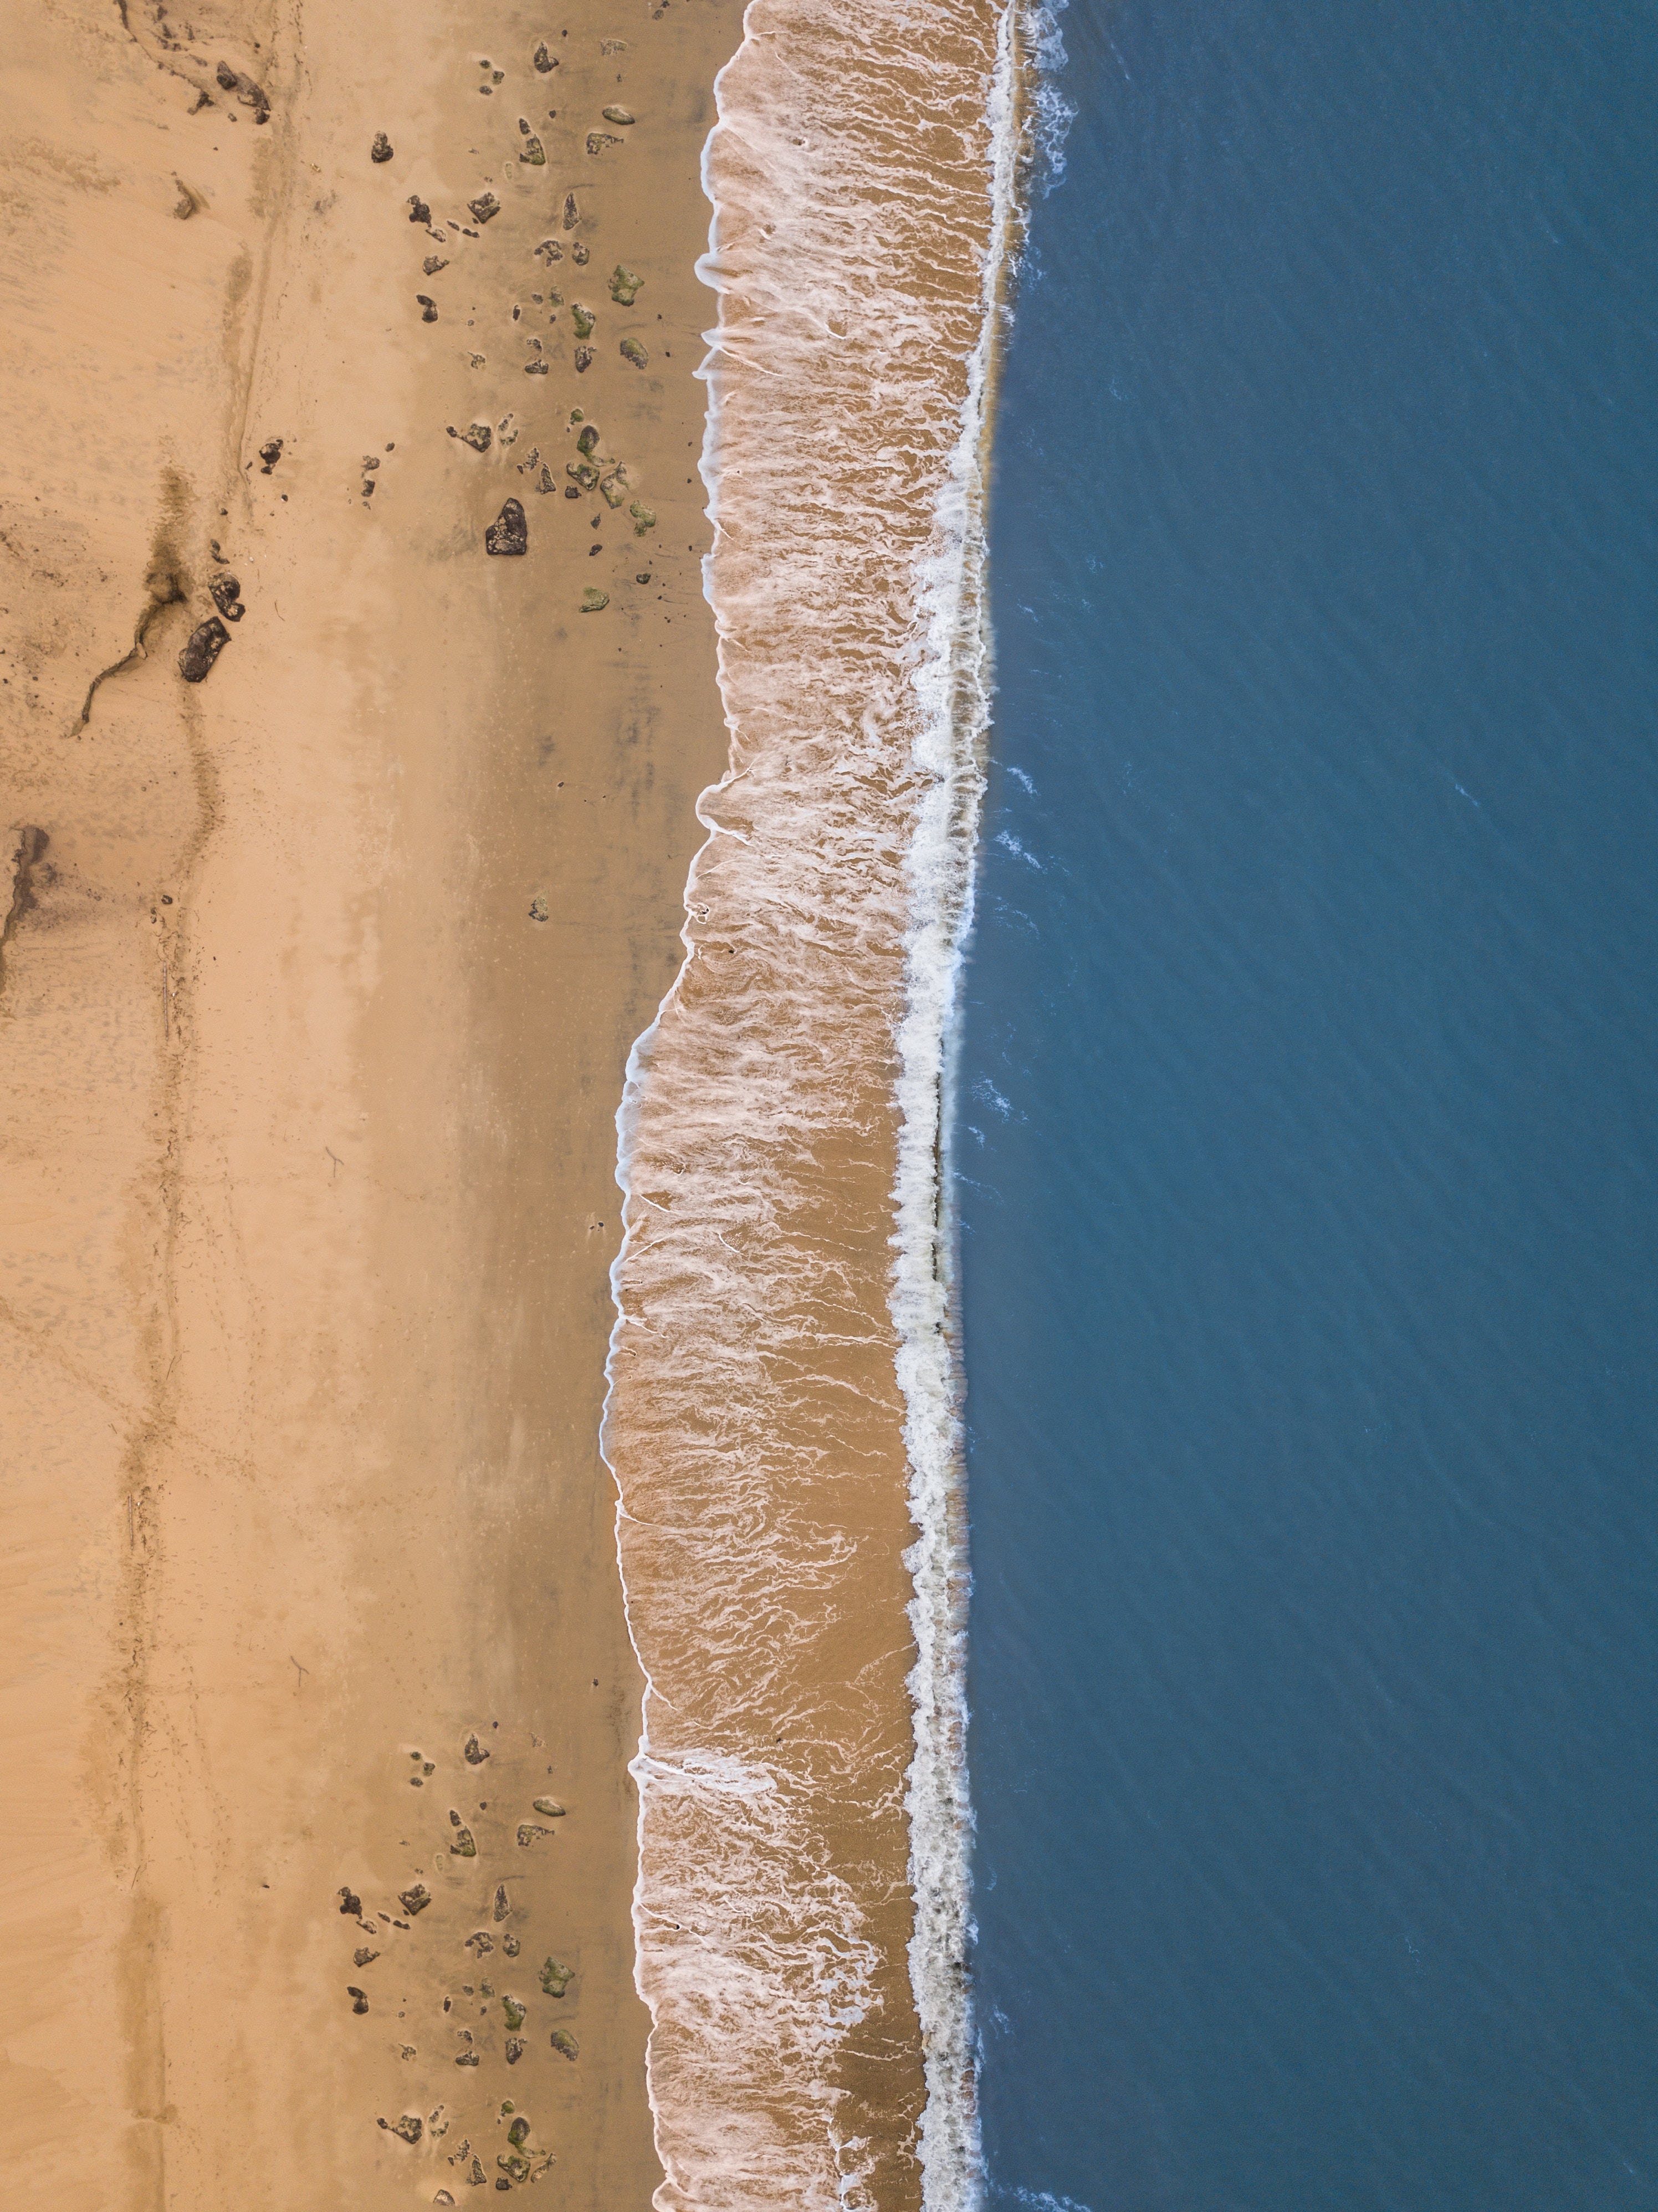 nature, sea, beach, sand, view from above, surf, wave phone wallpaper